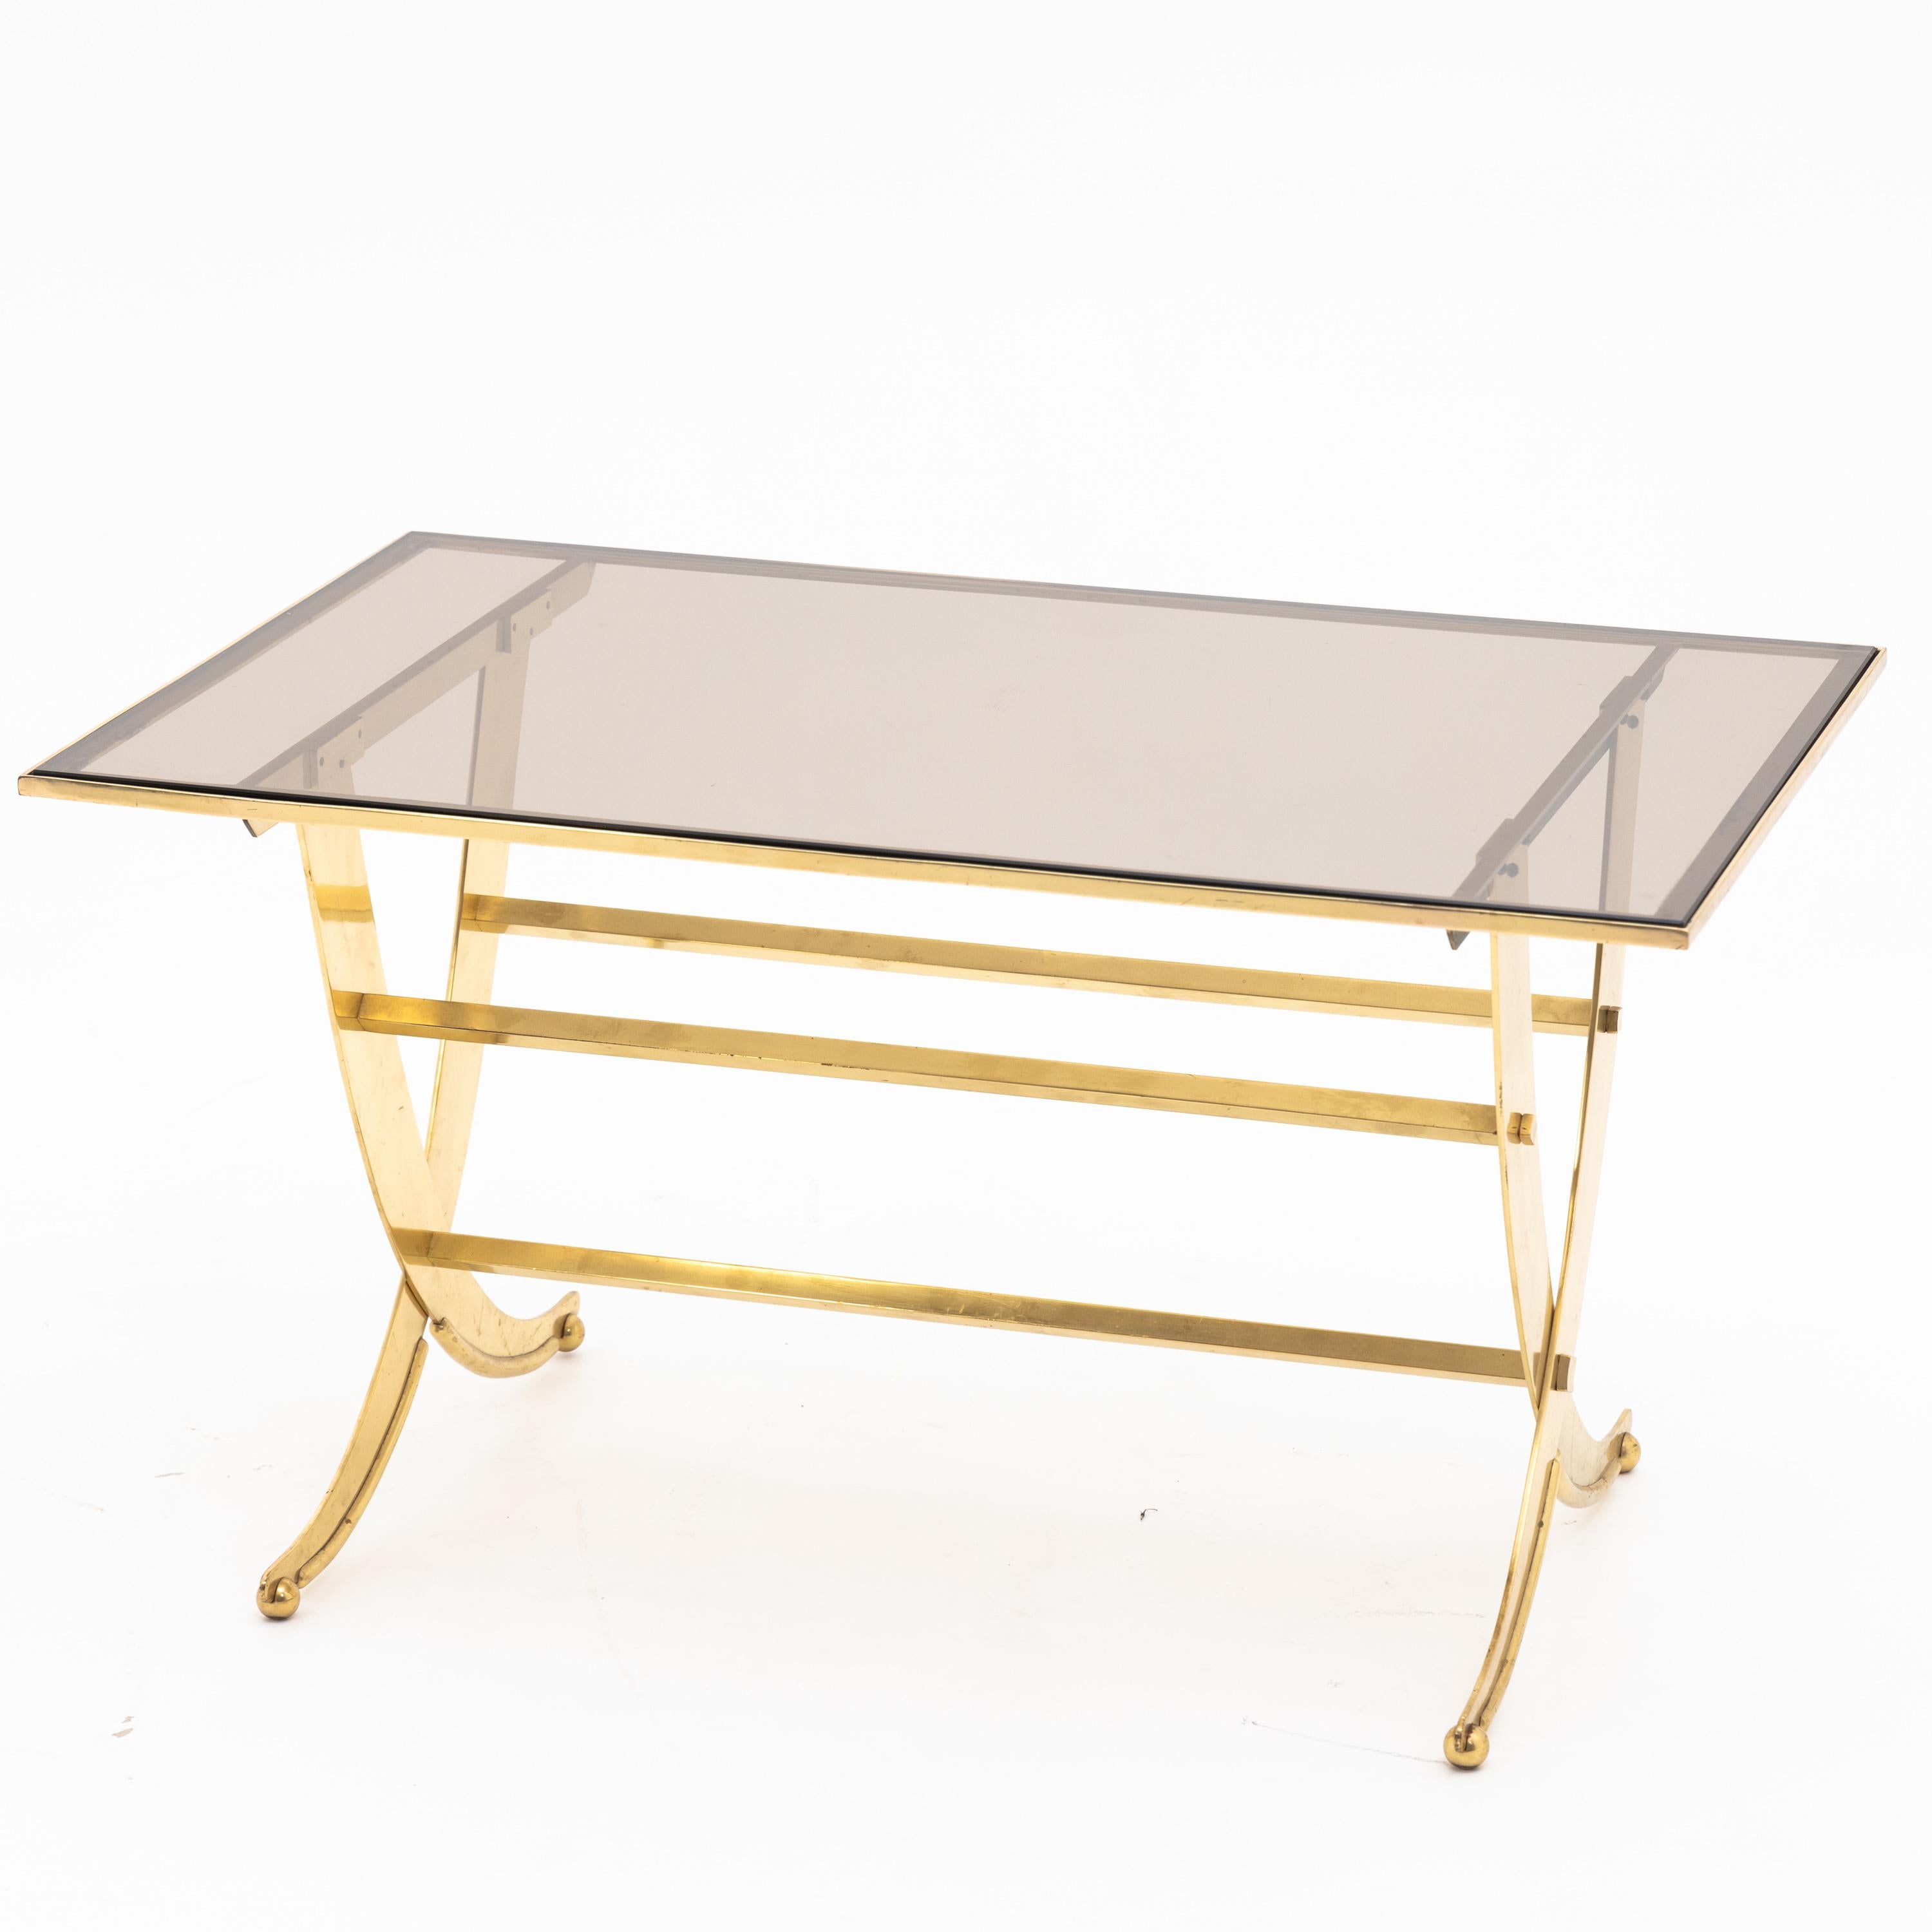 Coffee table standing on X-shaped brass frame with rectangular smoked glass top.